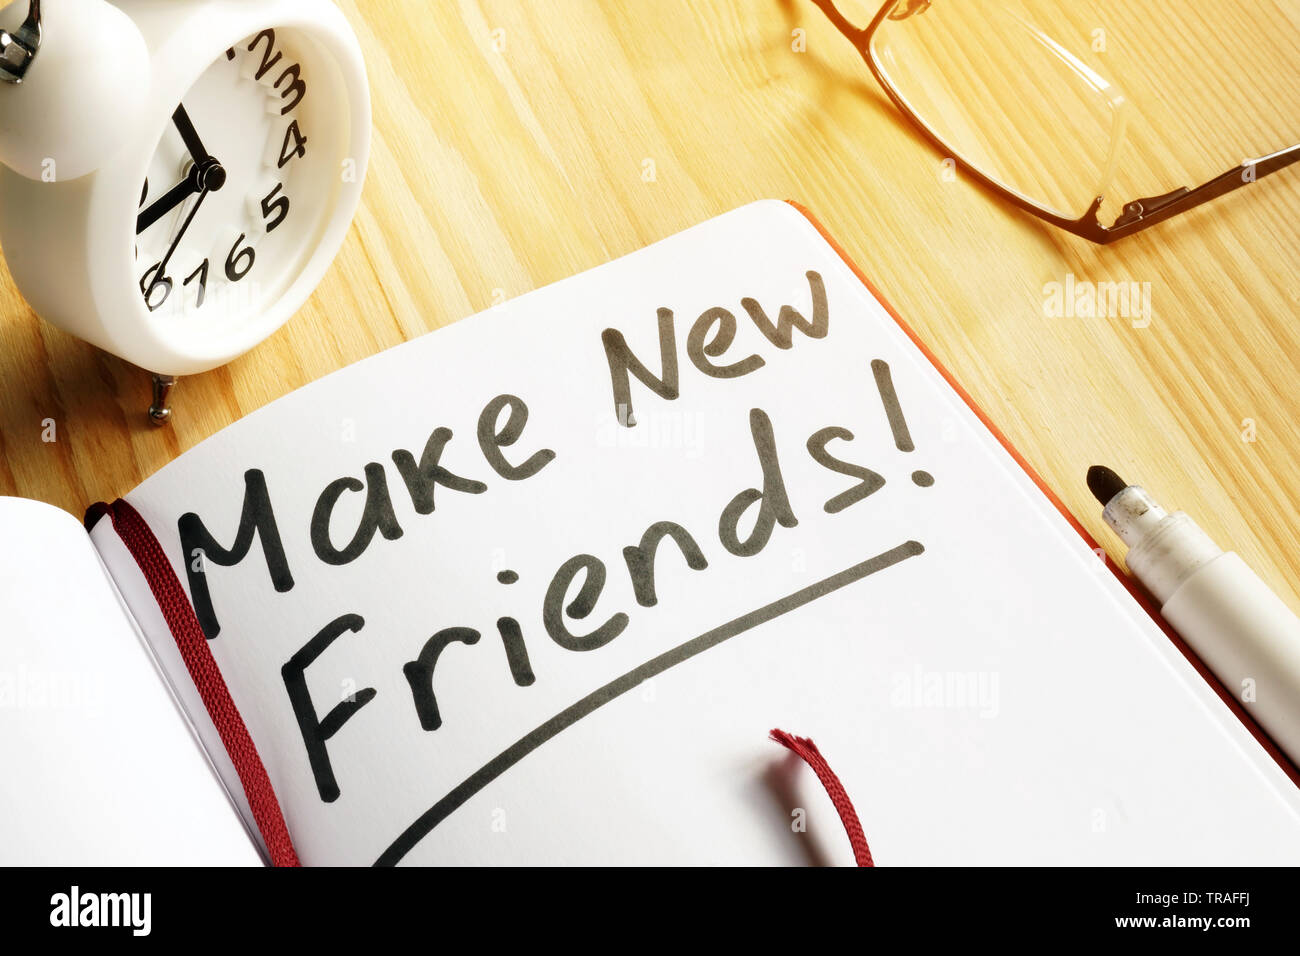 Make new friends. Networking concept. Note pad and alarm clock. Stock Photo